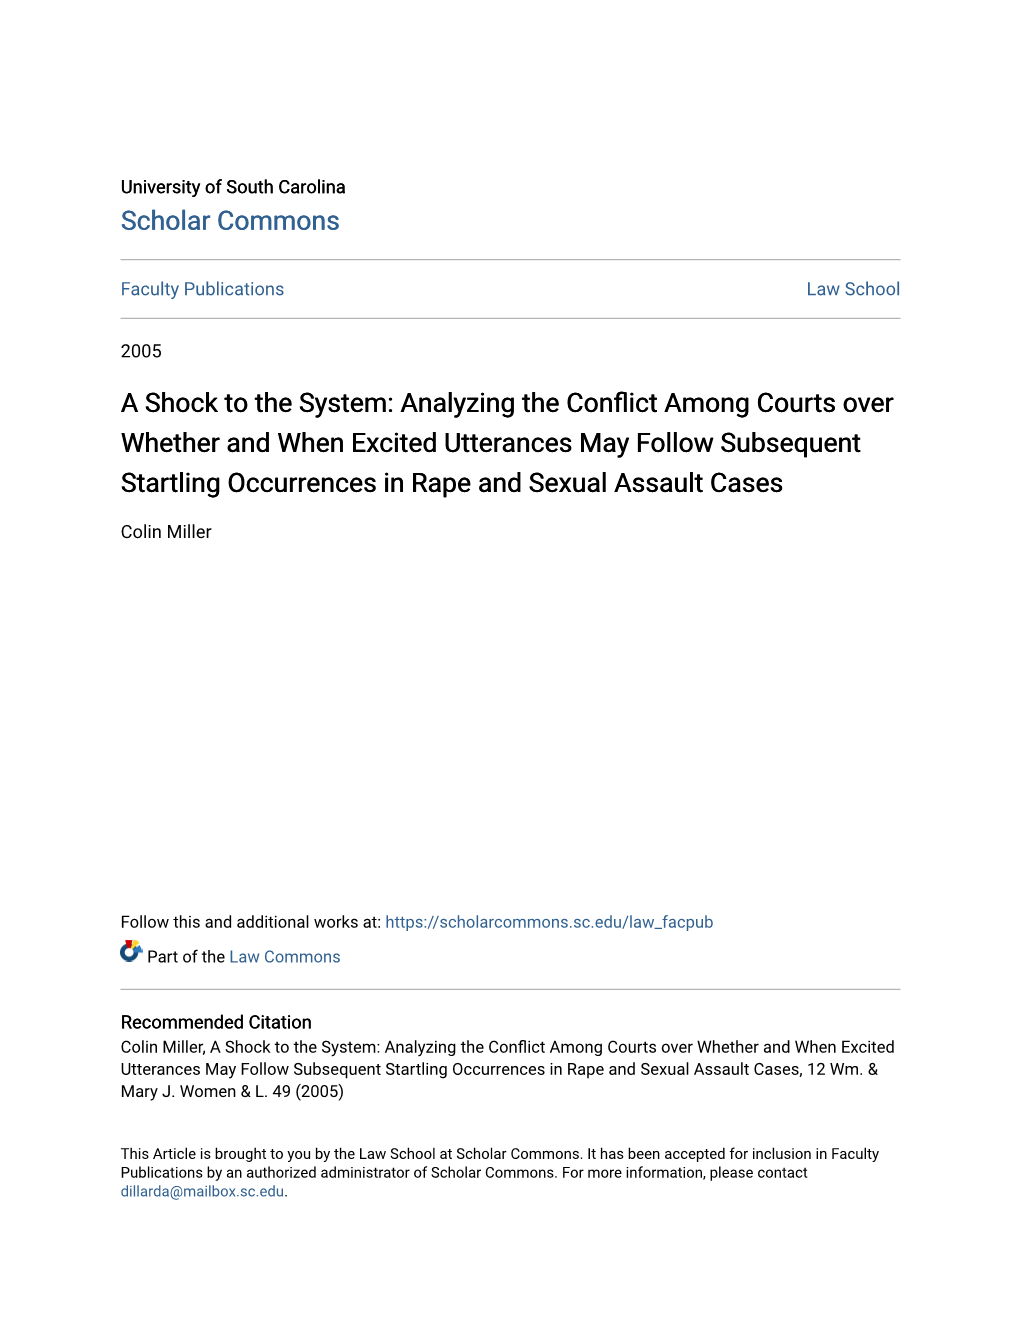 Analyzing the Conflict Among Courts Over Whether and When Excited Utterances May Follow Subsequent Startling Occurrences in Rape and Sexual Assault Cases